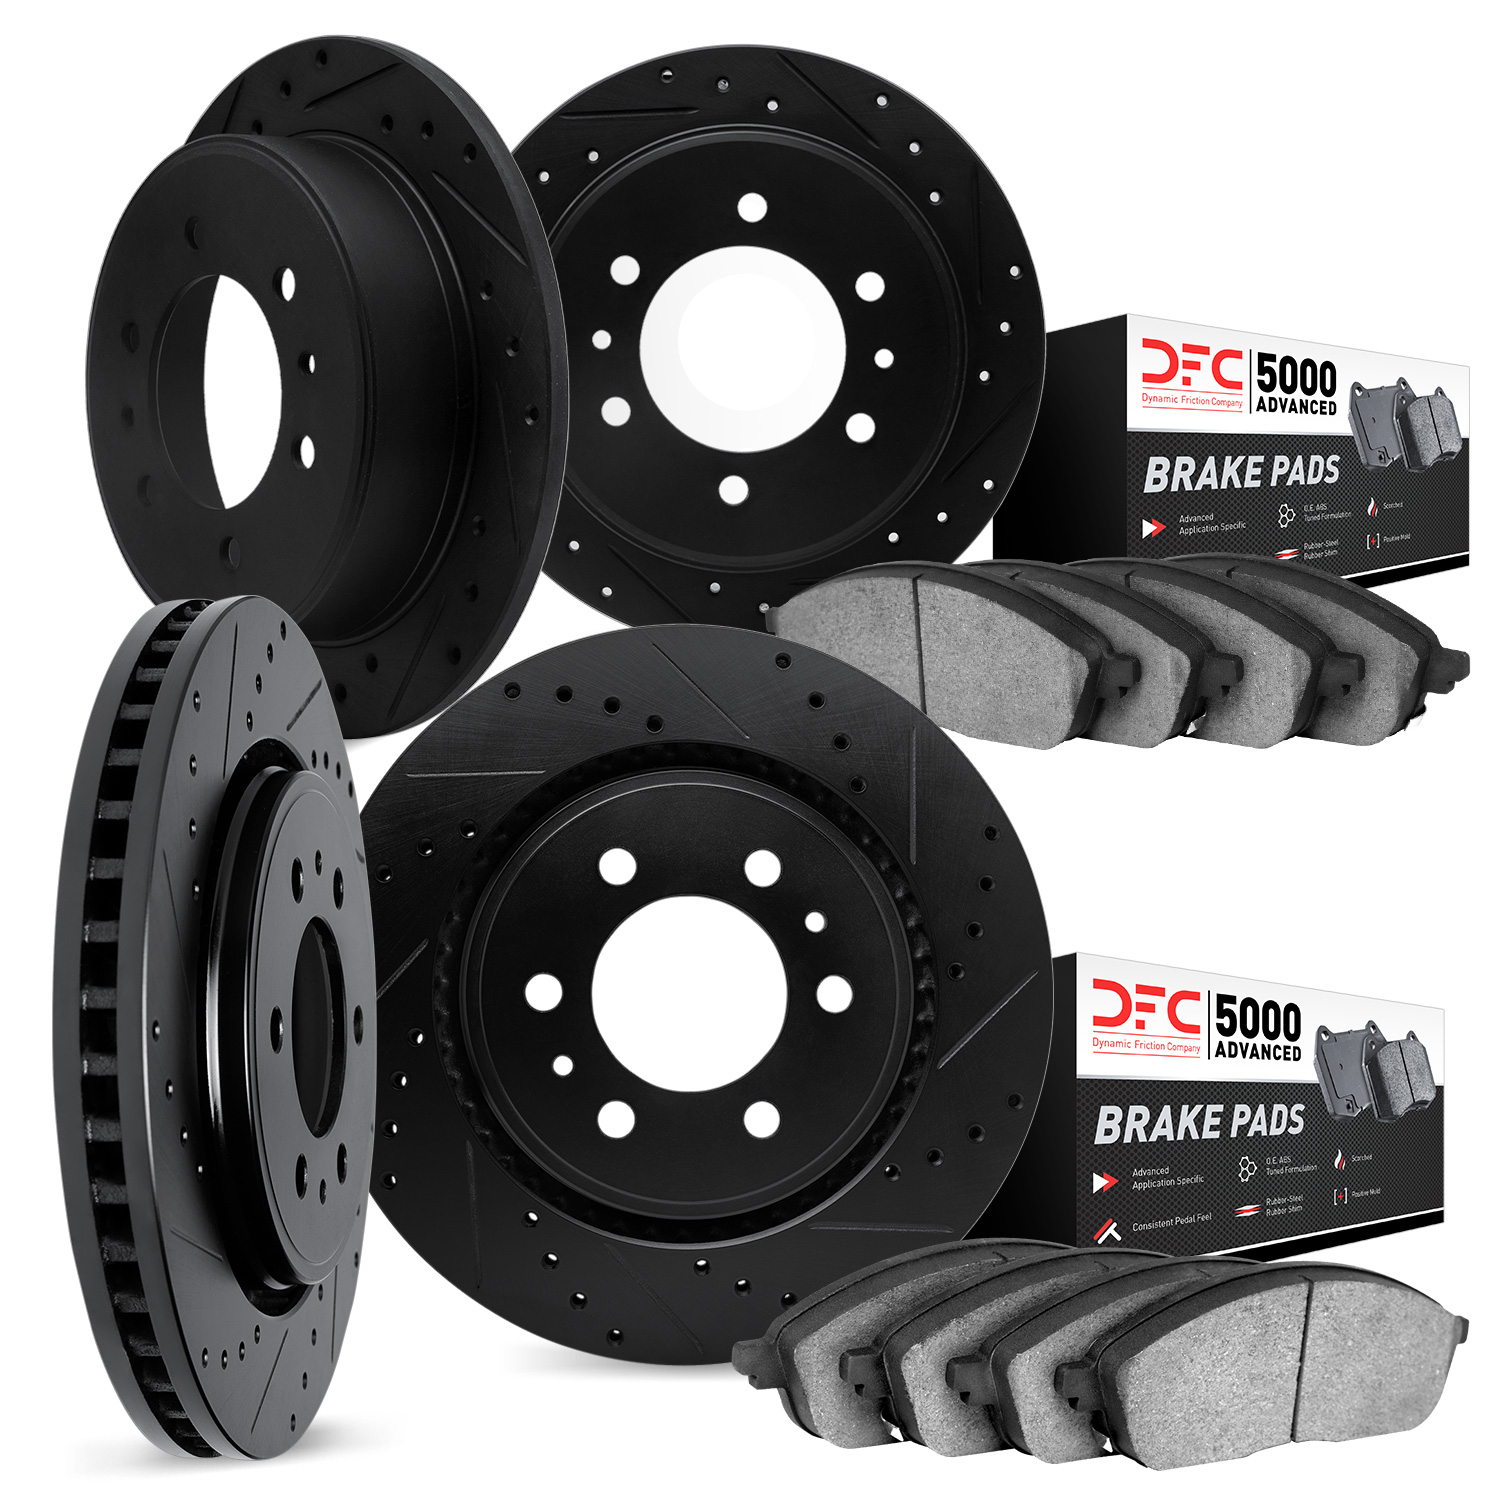 8504-54392 Drilled/Slotted Brake Rotors w/5000 Advanced Brake Pads Kit [Black], Fits Select Ford/Lincoln/Mercury/Mazda, Position